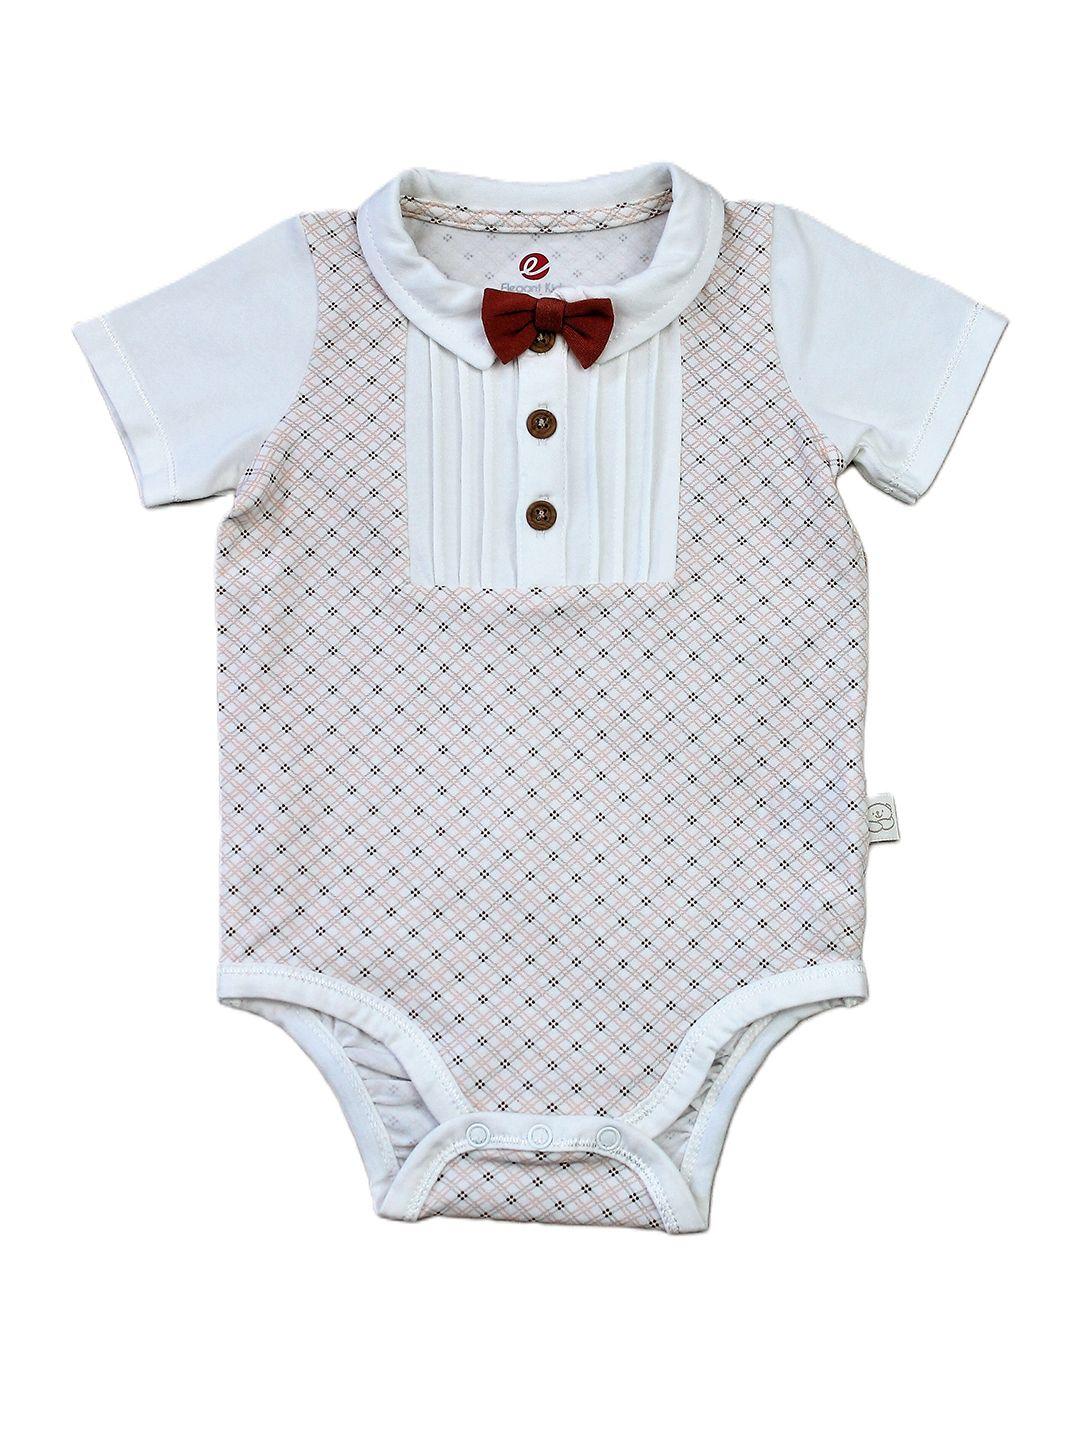 baesd-infants-printed-romper-with-bow-tie-&-pin-stripe